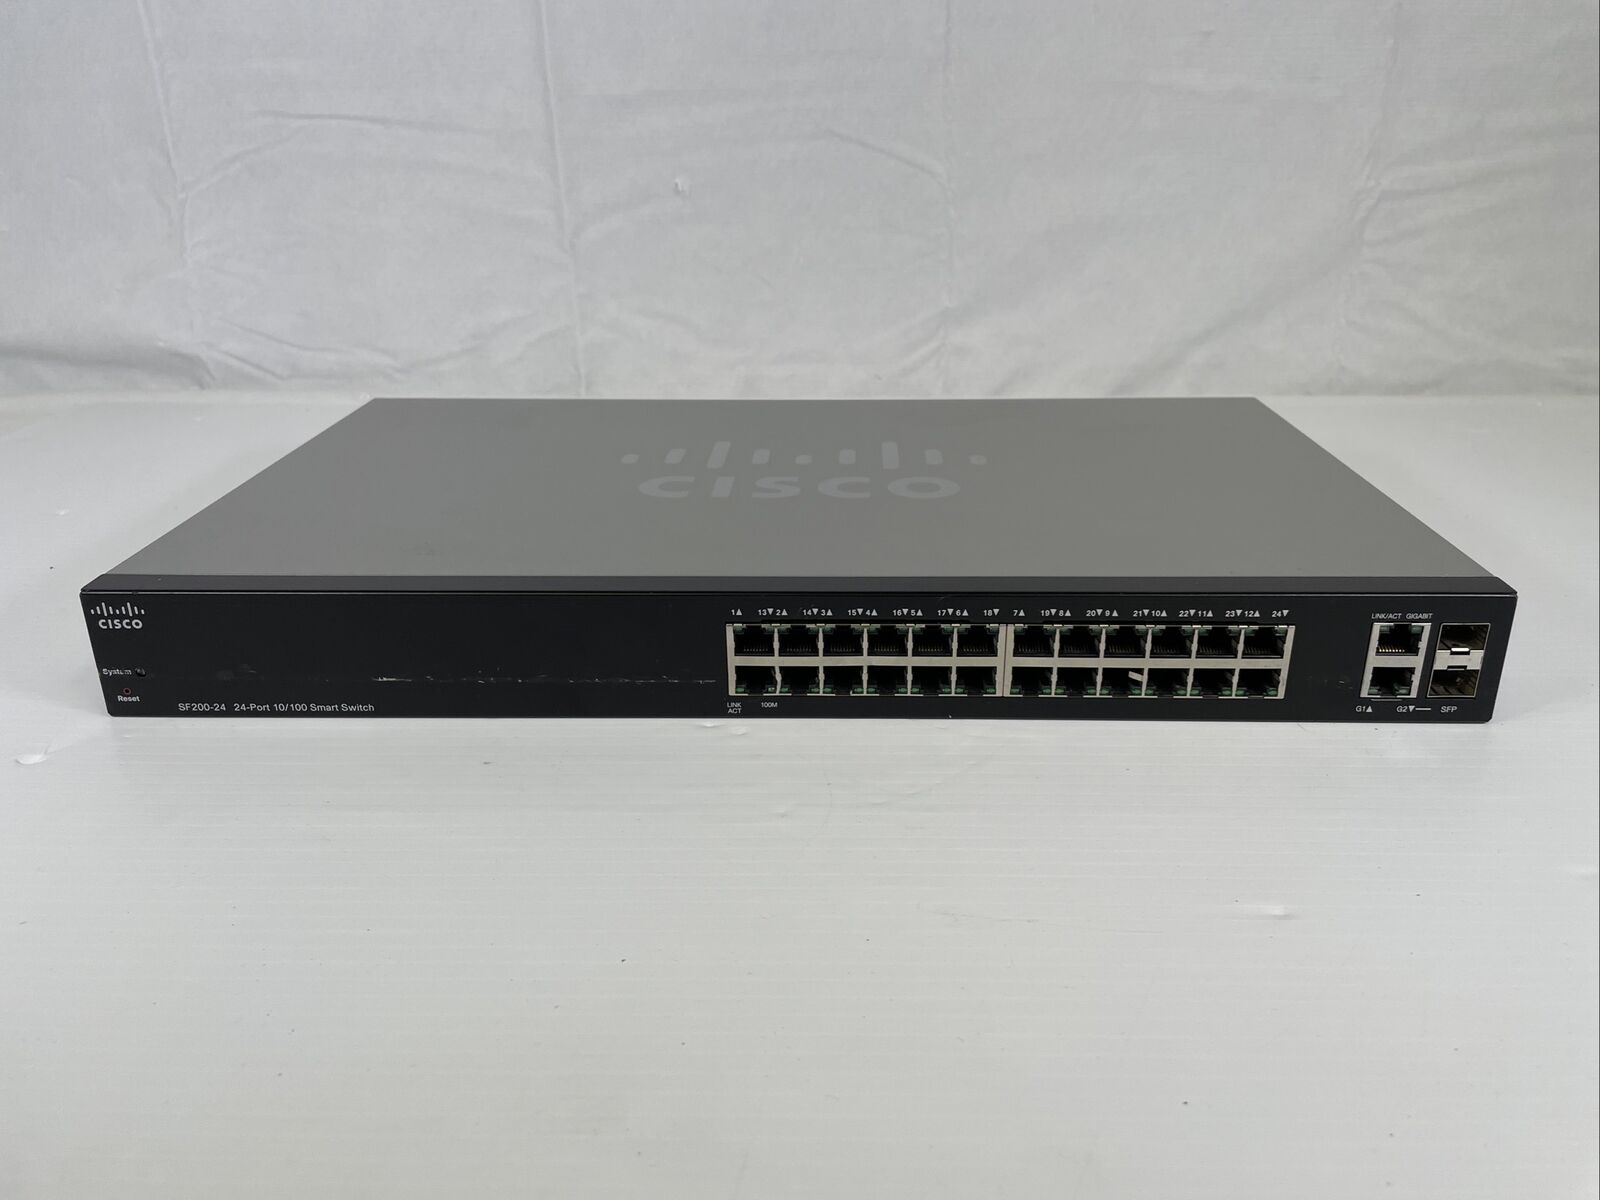 Cisco Small Business SF200-24 24-Port Smart 10/100 Fast Ethernet Network TESTED